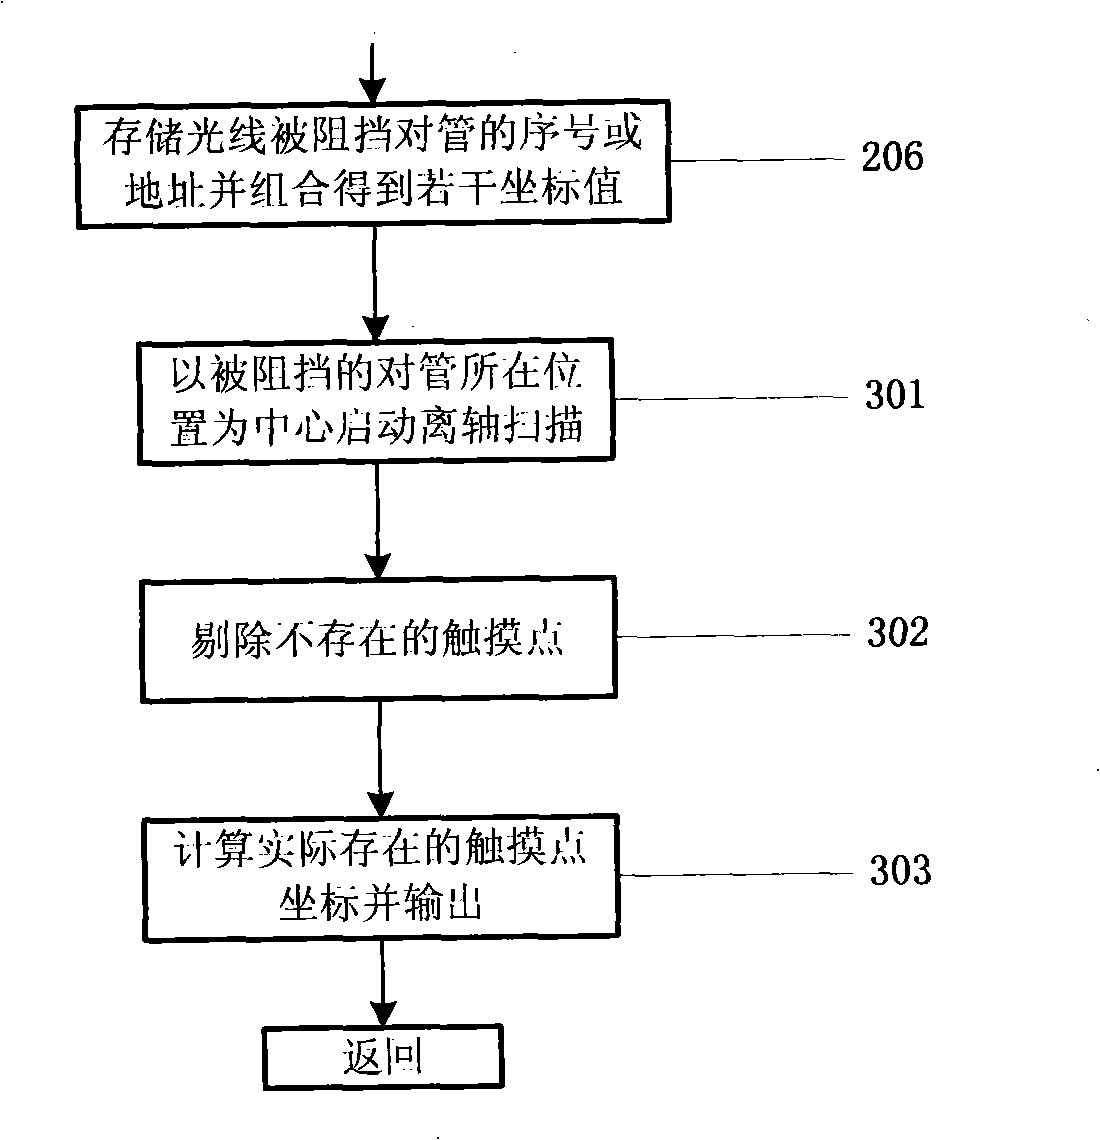 Method for recognizing multiple touch points on infrared touch screen